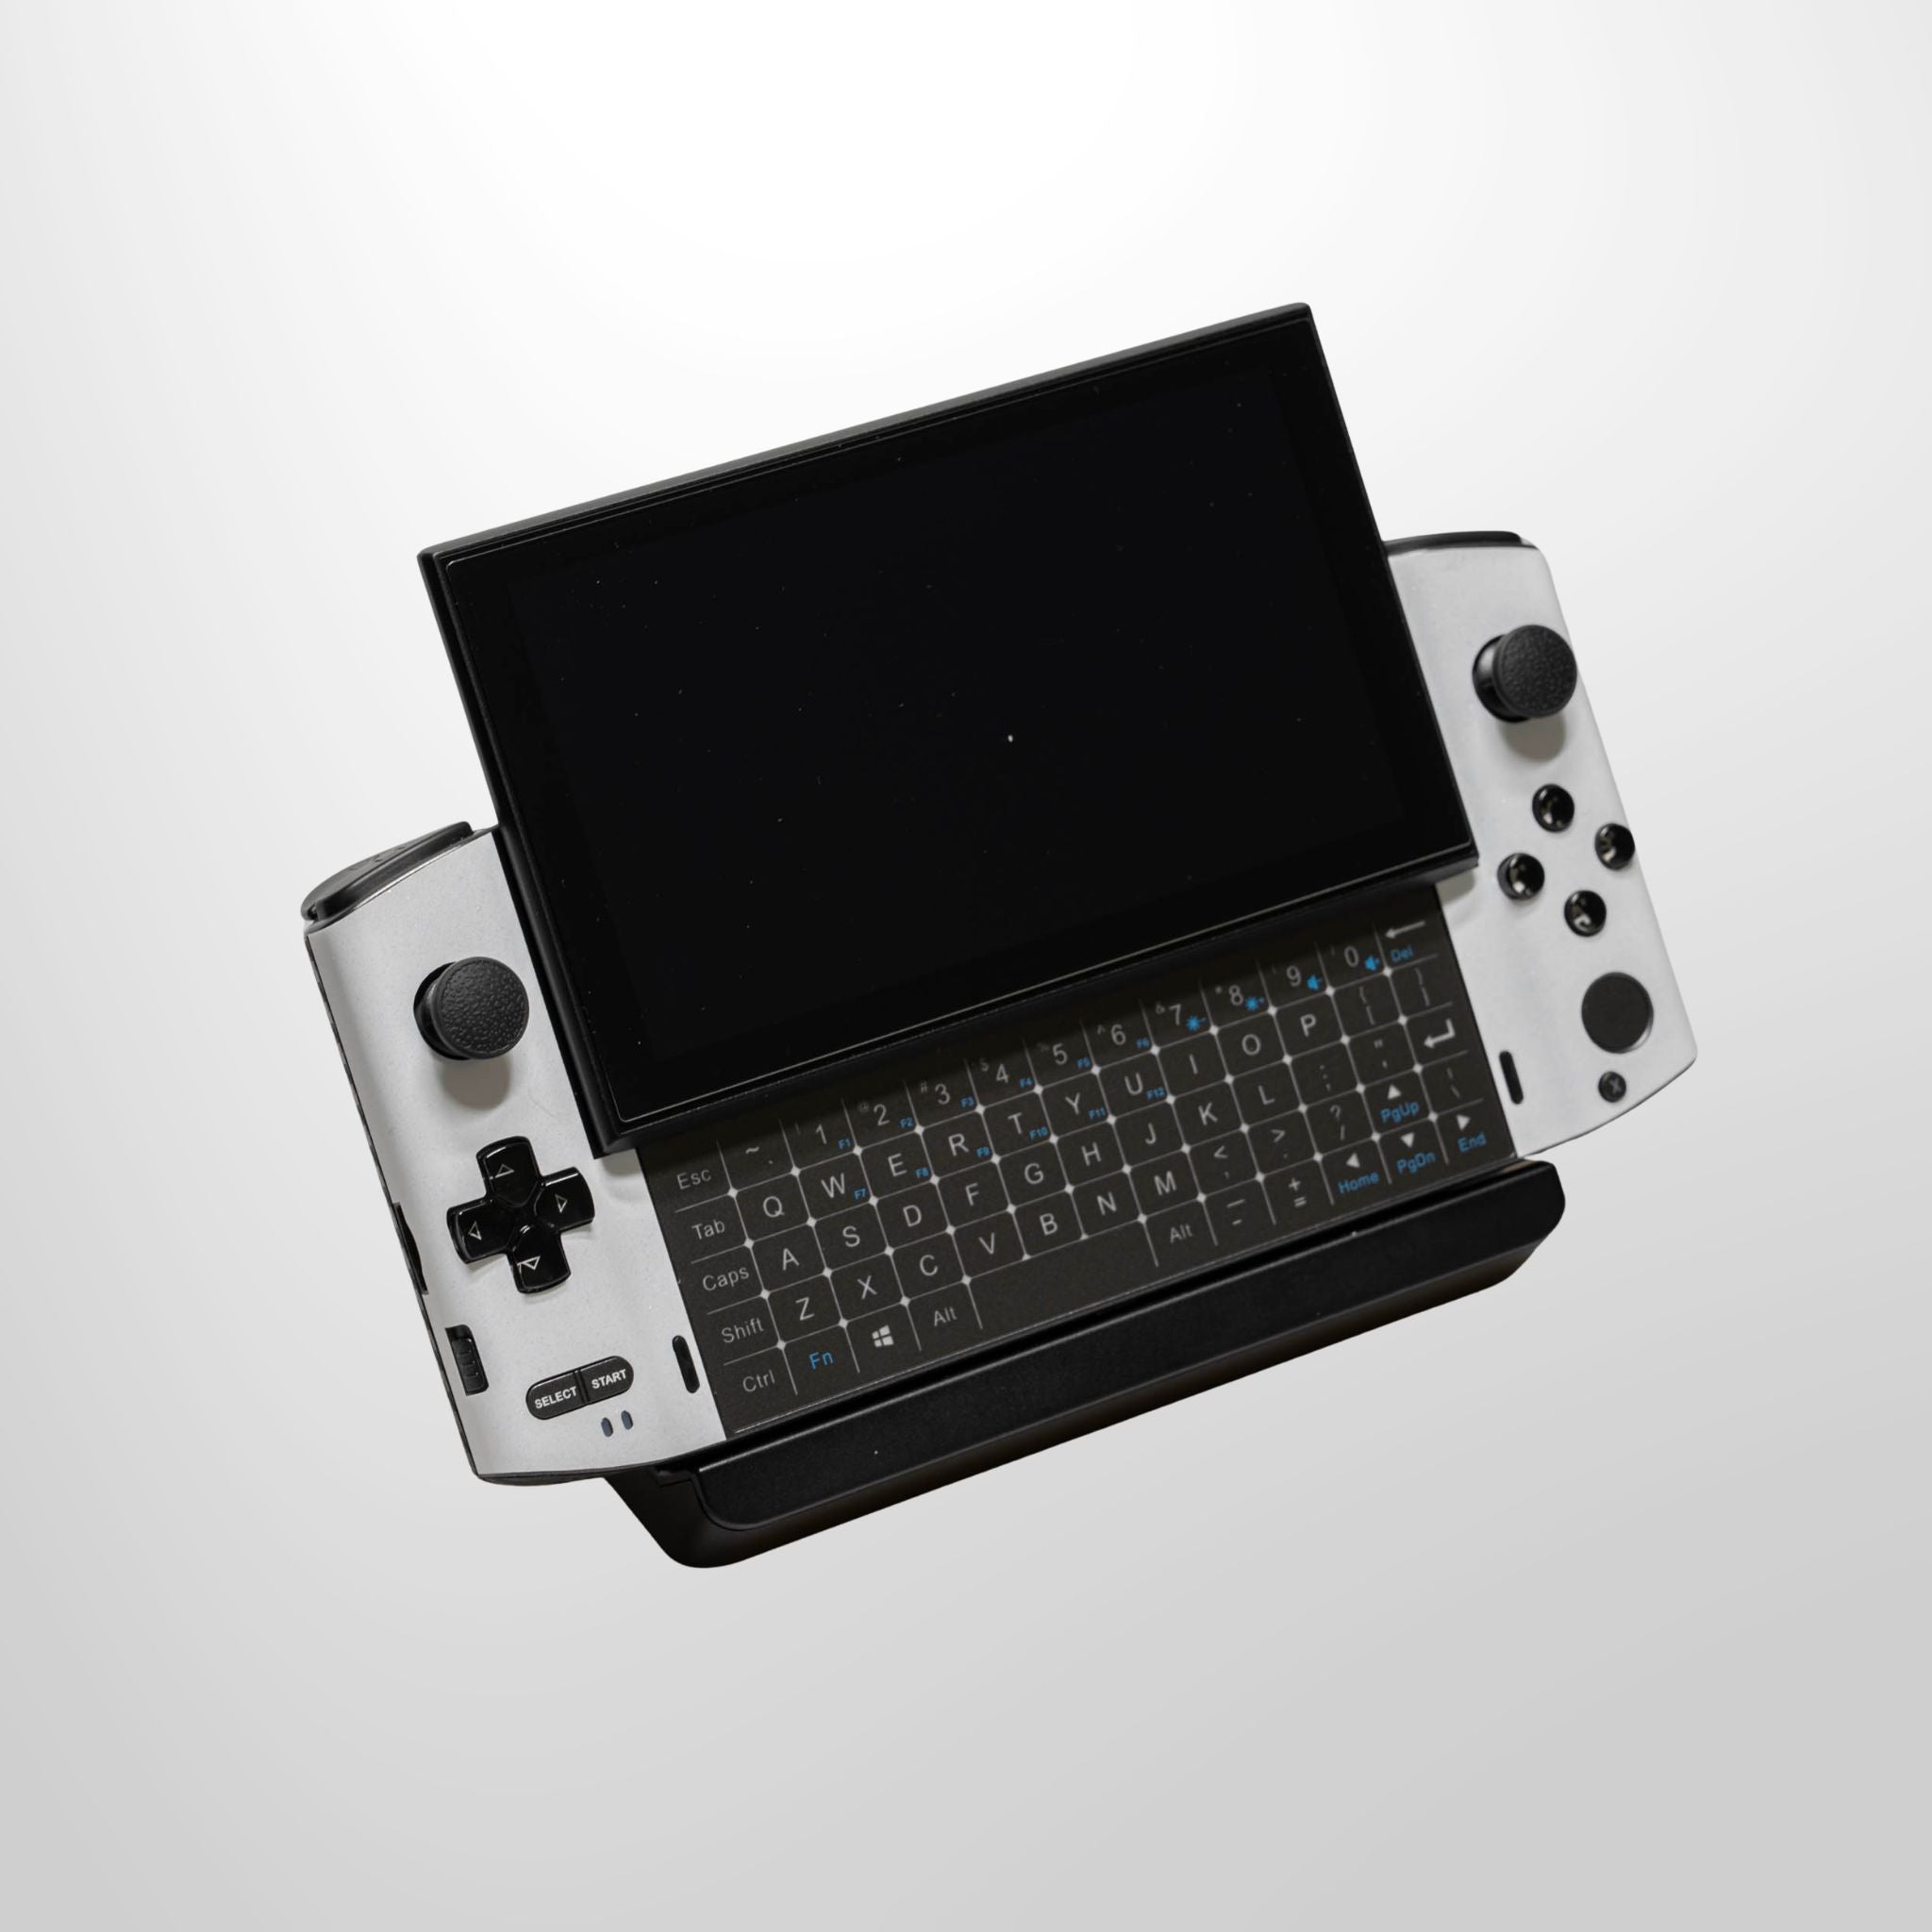 GPD Win 3 Skins (By Special Request)